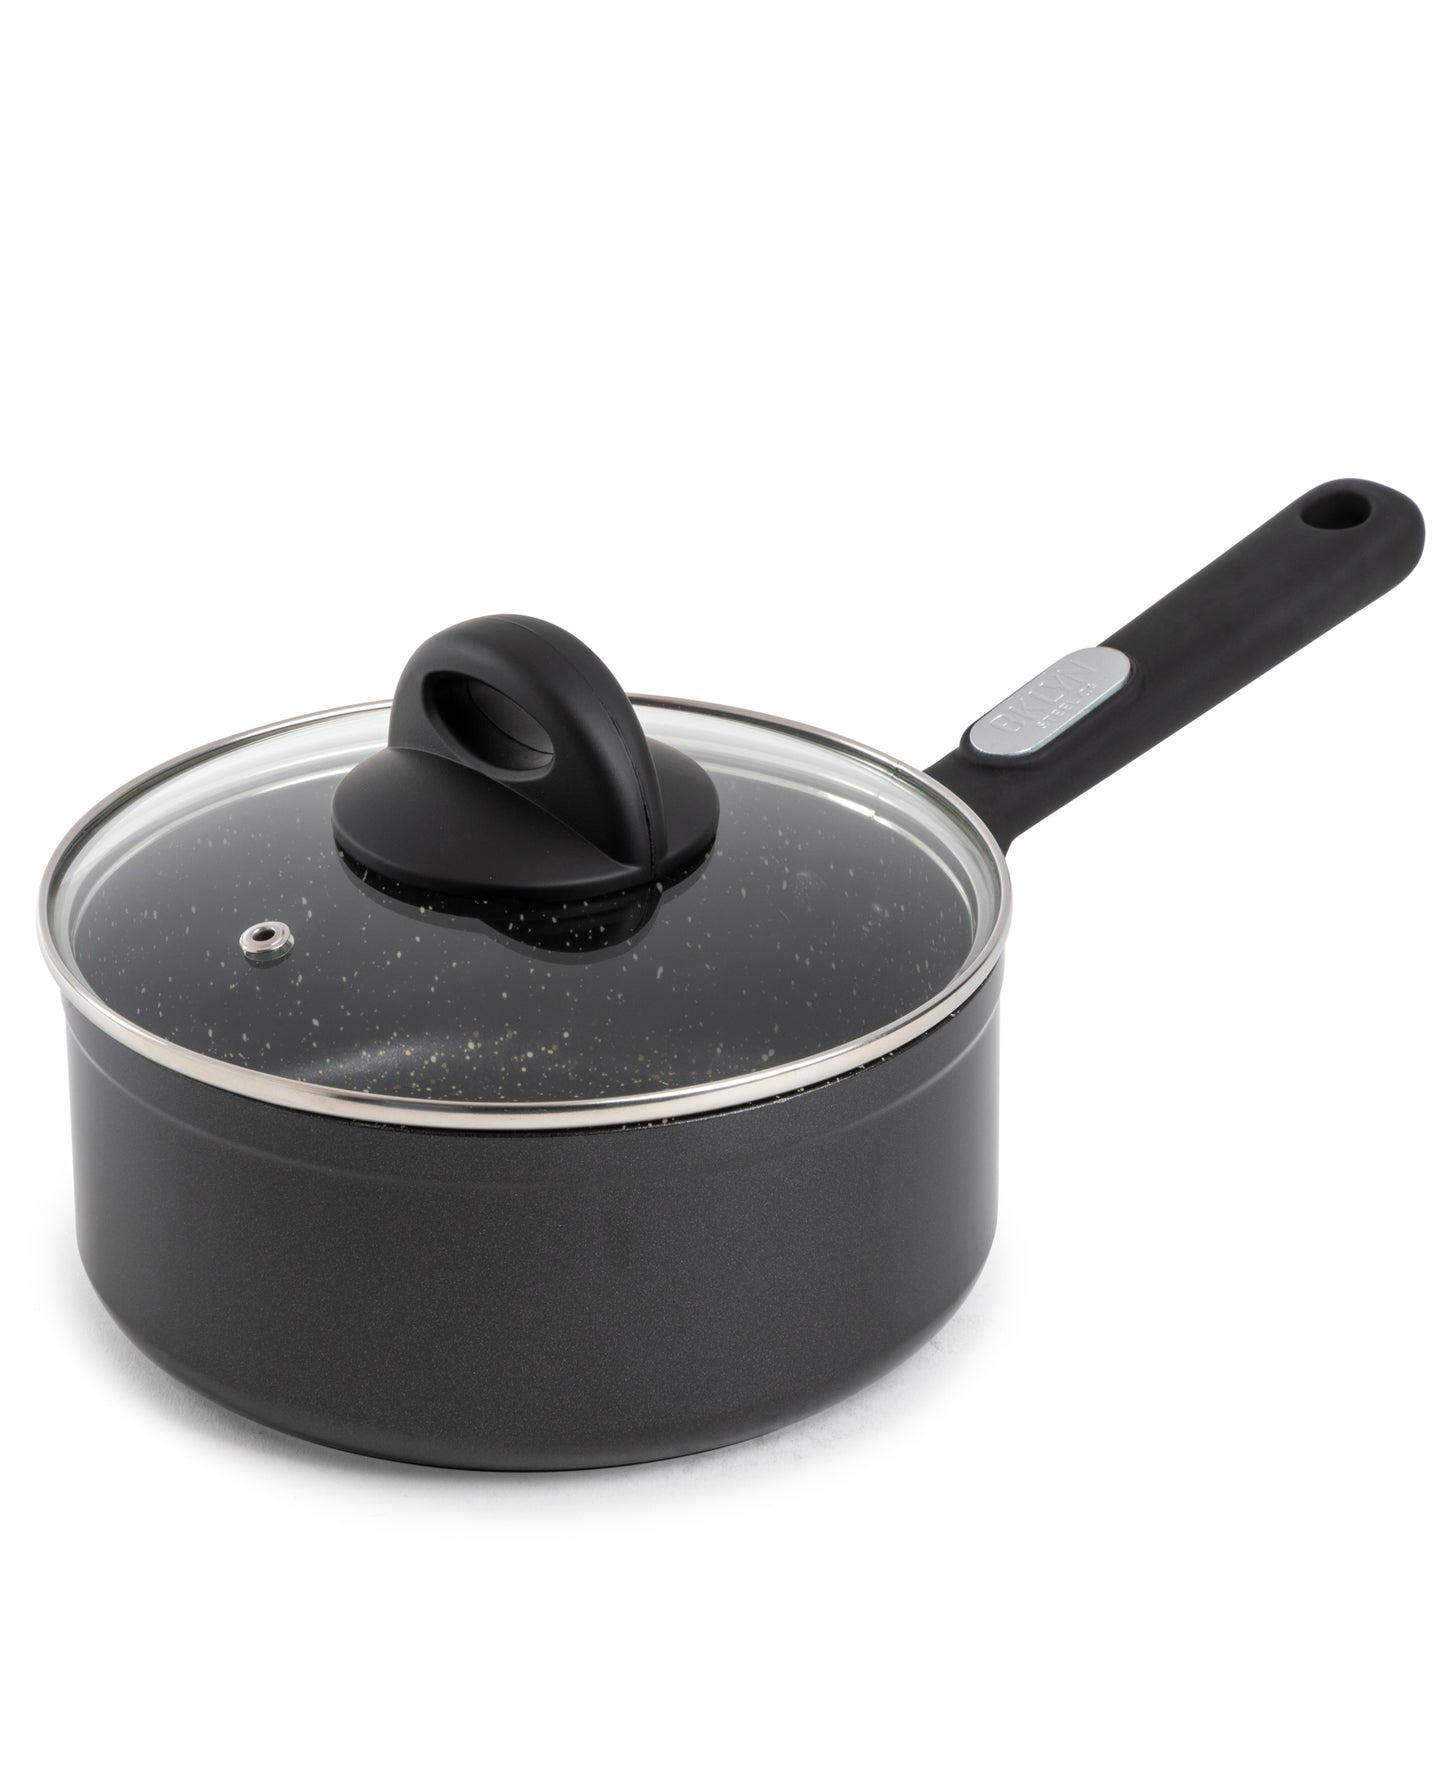 Black saucepan with black handle and clear lid